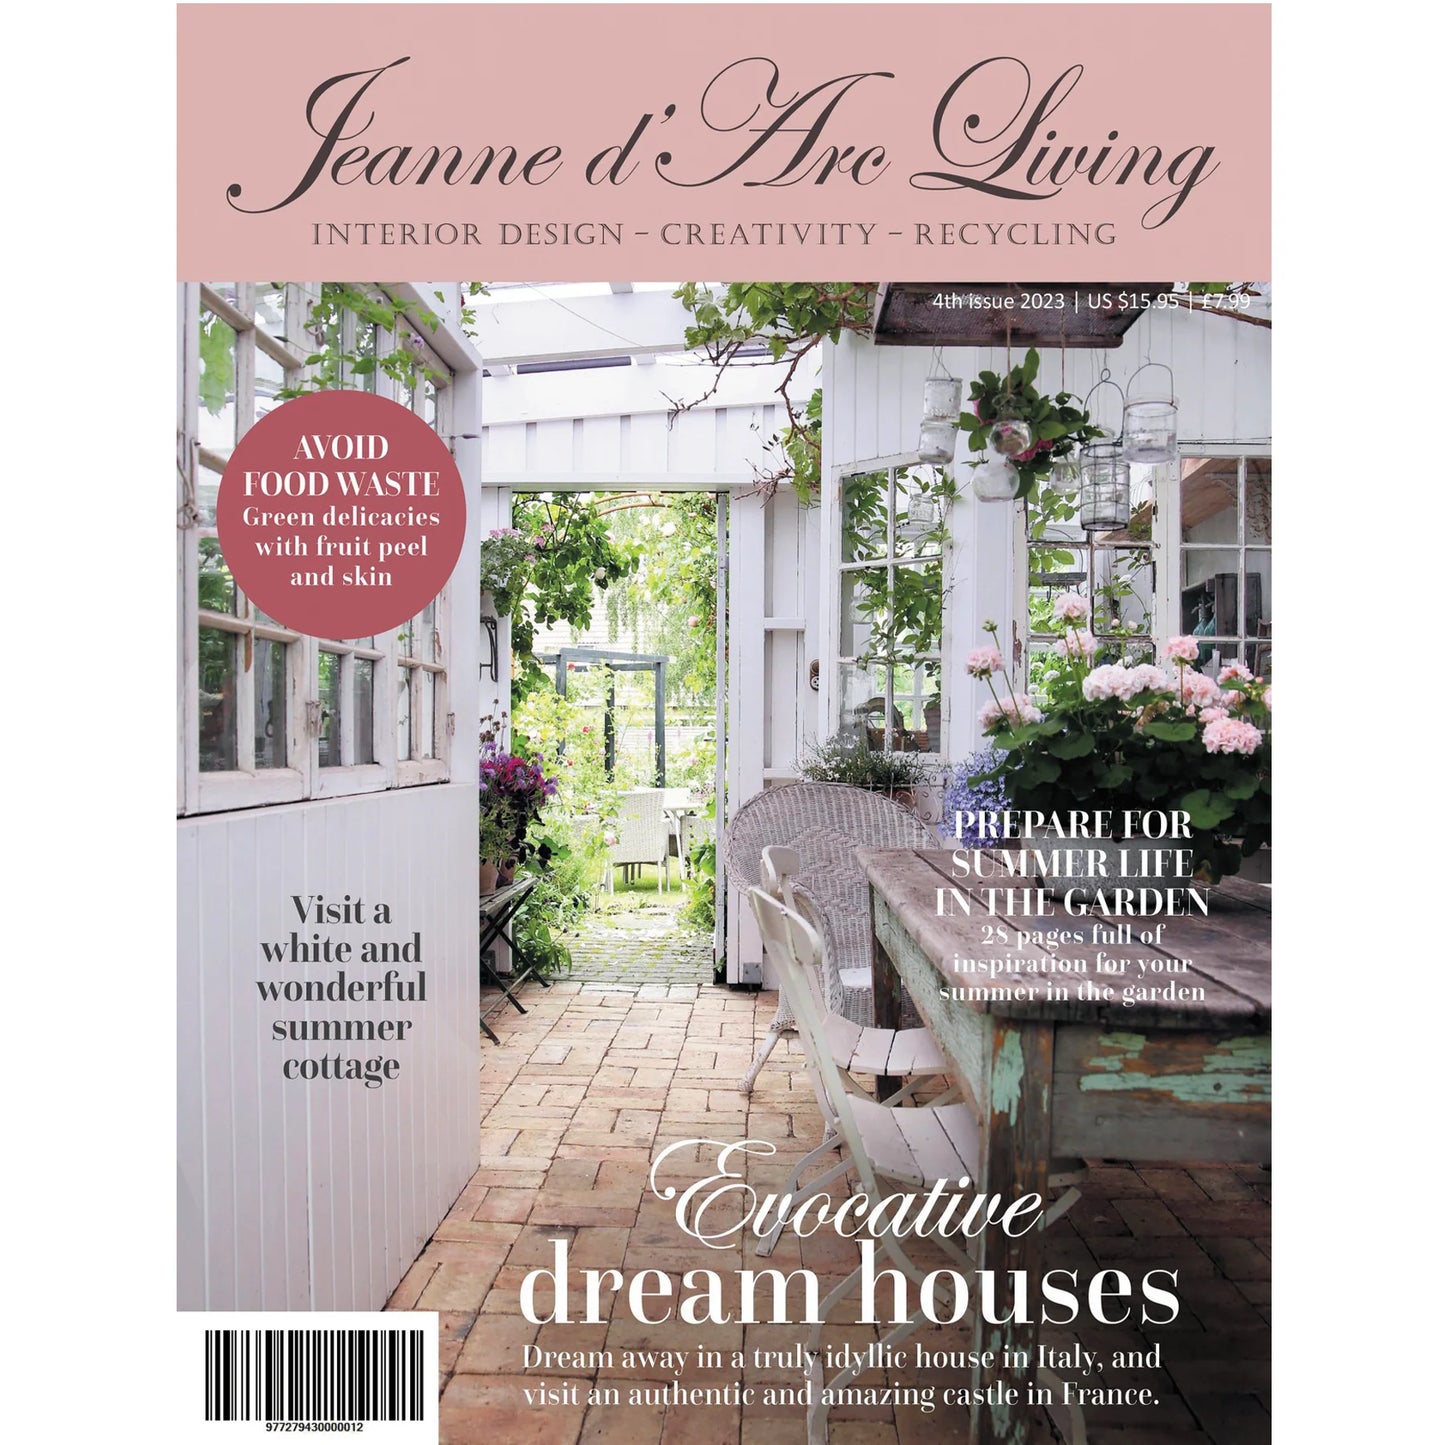 Jeanne D' Arc Living Magazine - 2023 4th Issue